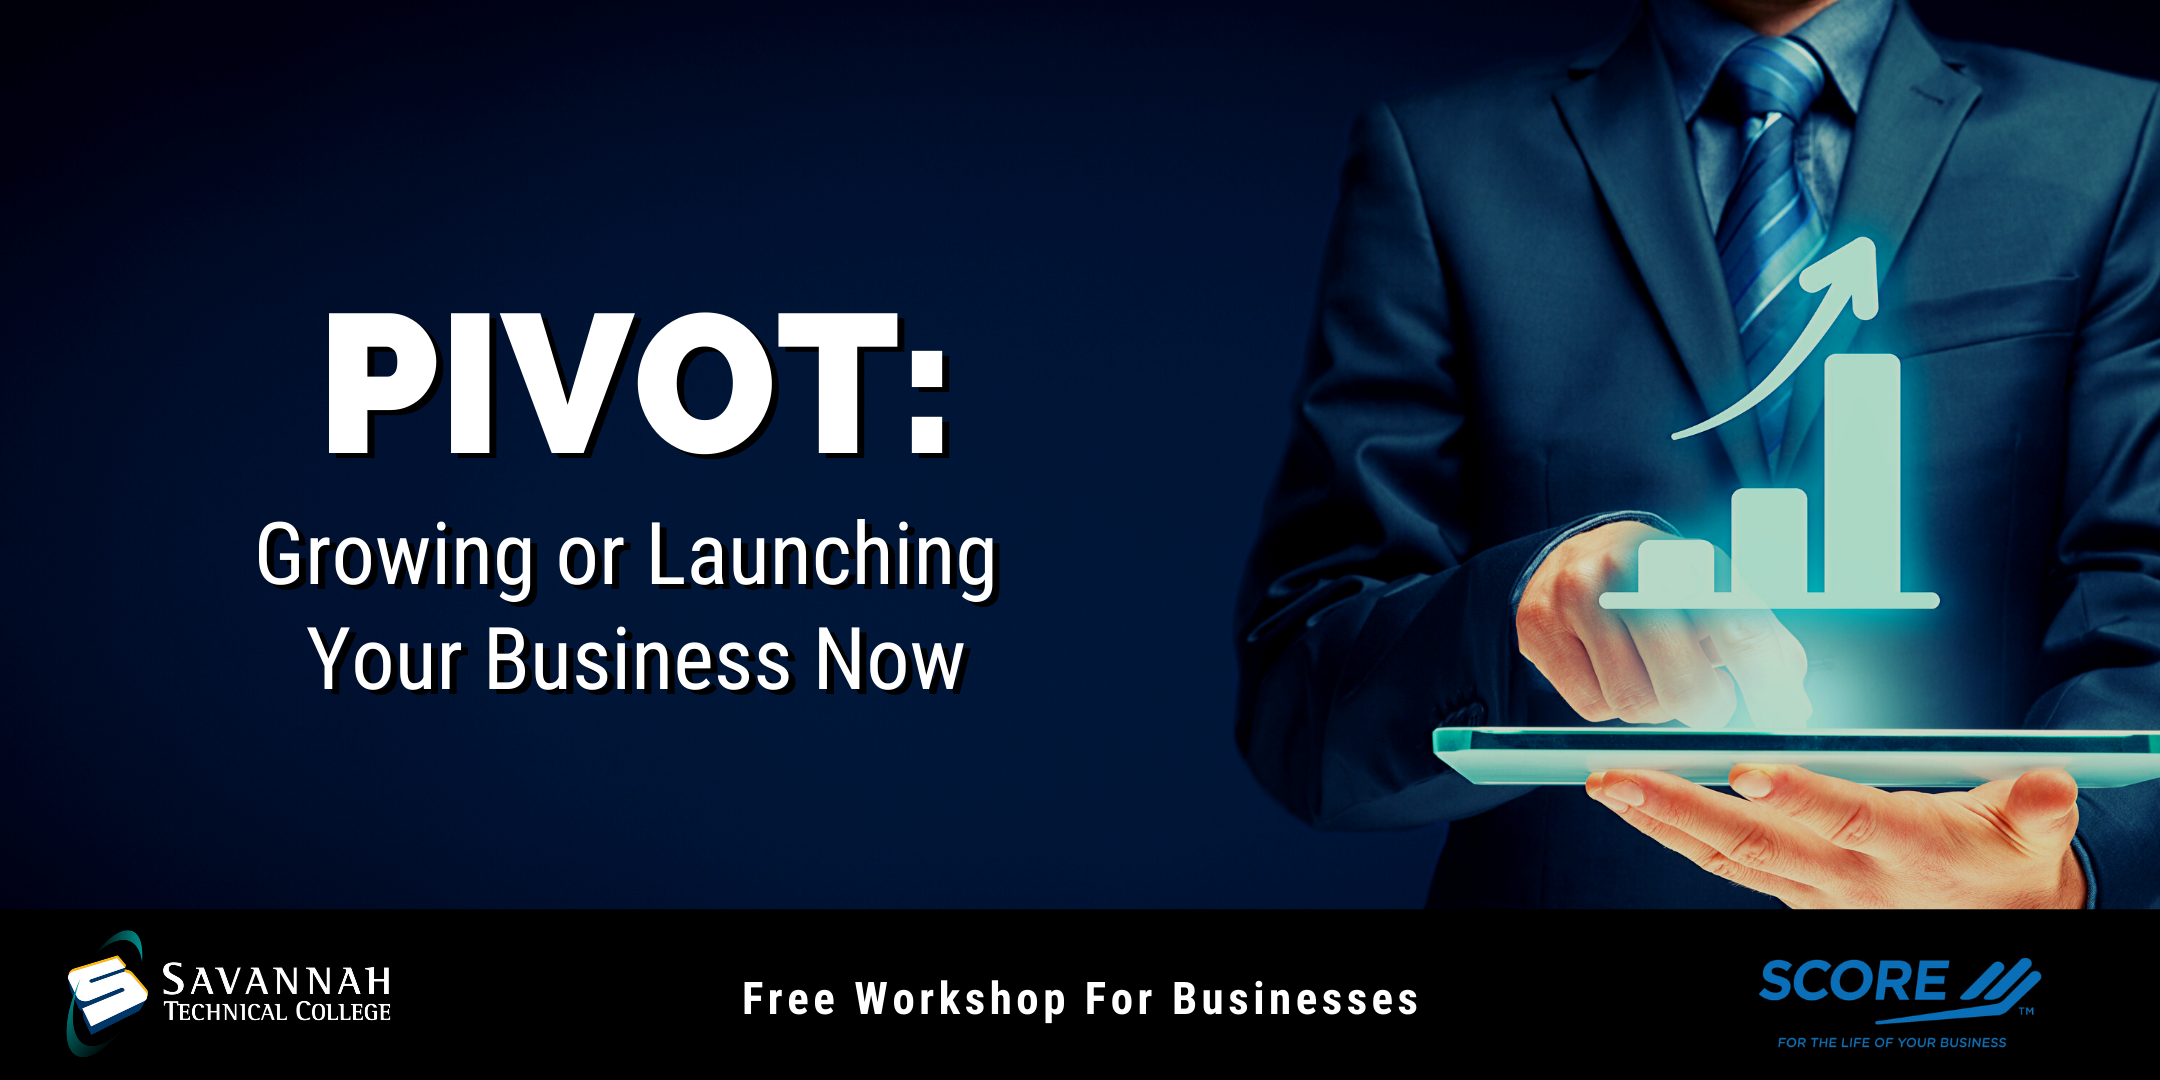 Pivot_ Growing or Launching Your Business Now EventBrite Page